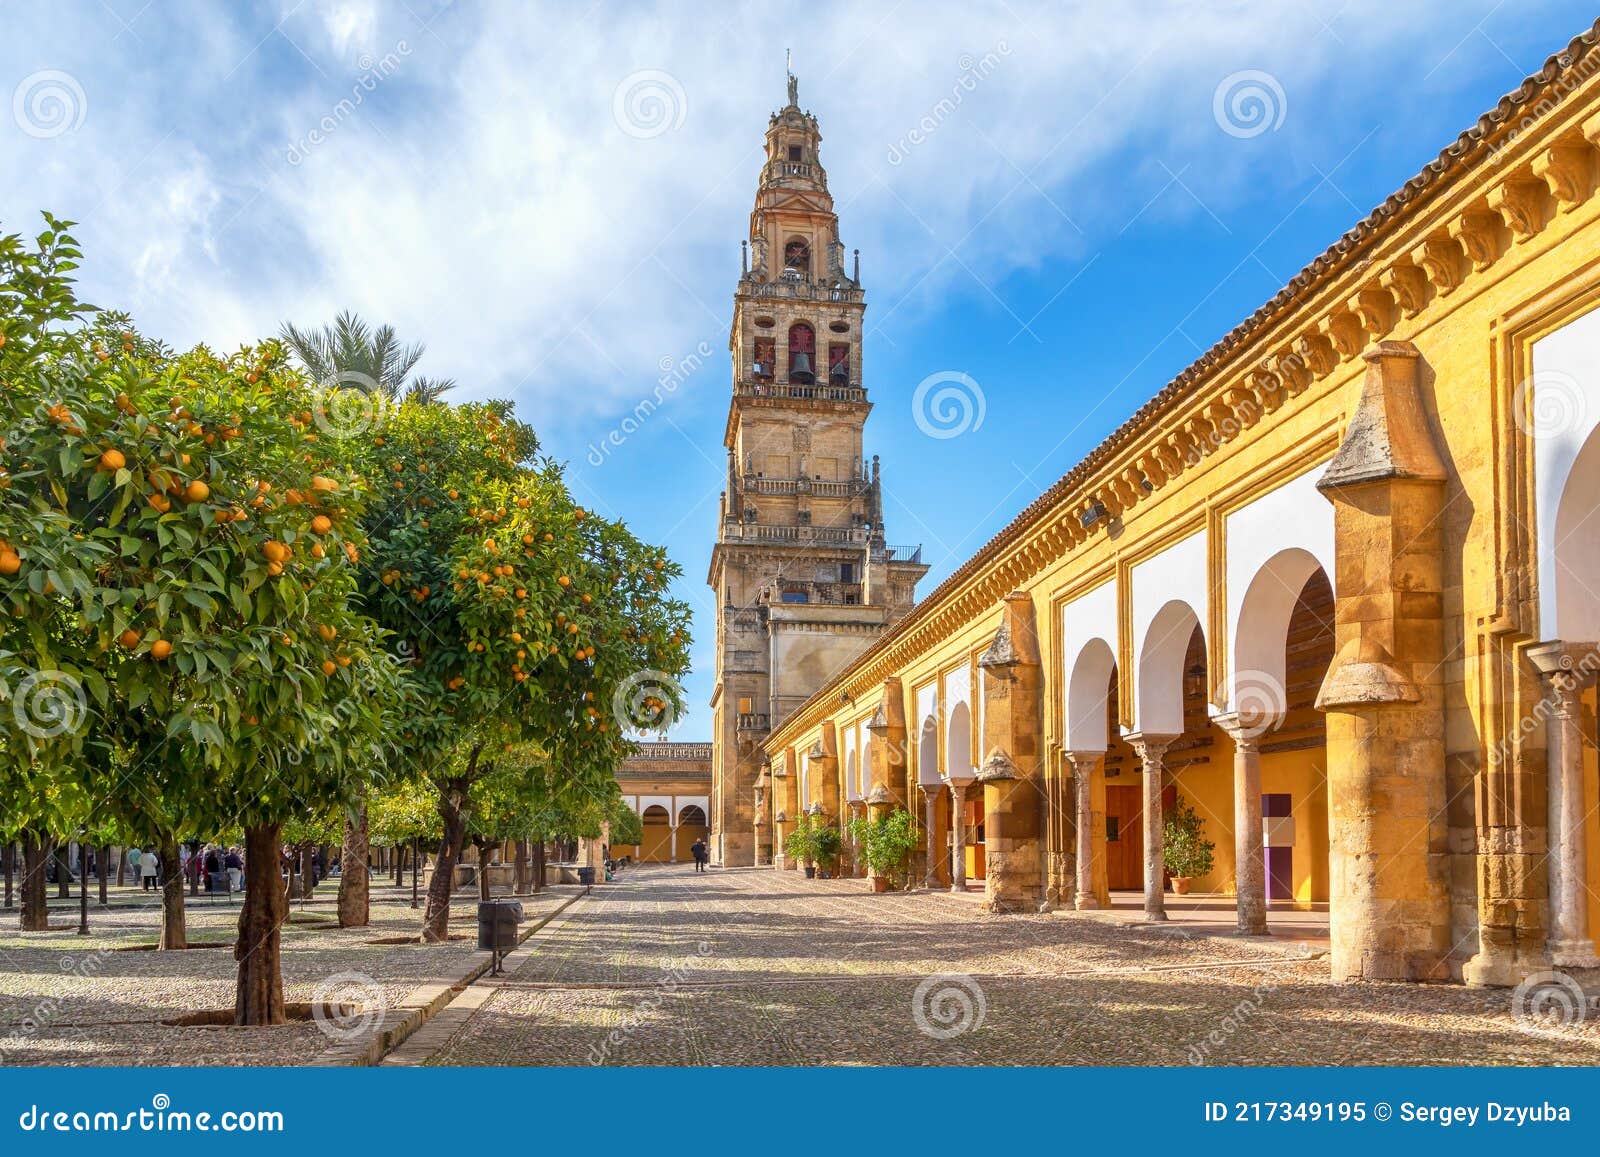 torre campanario and courtyard planted with orange trees in cordoba